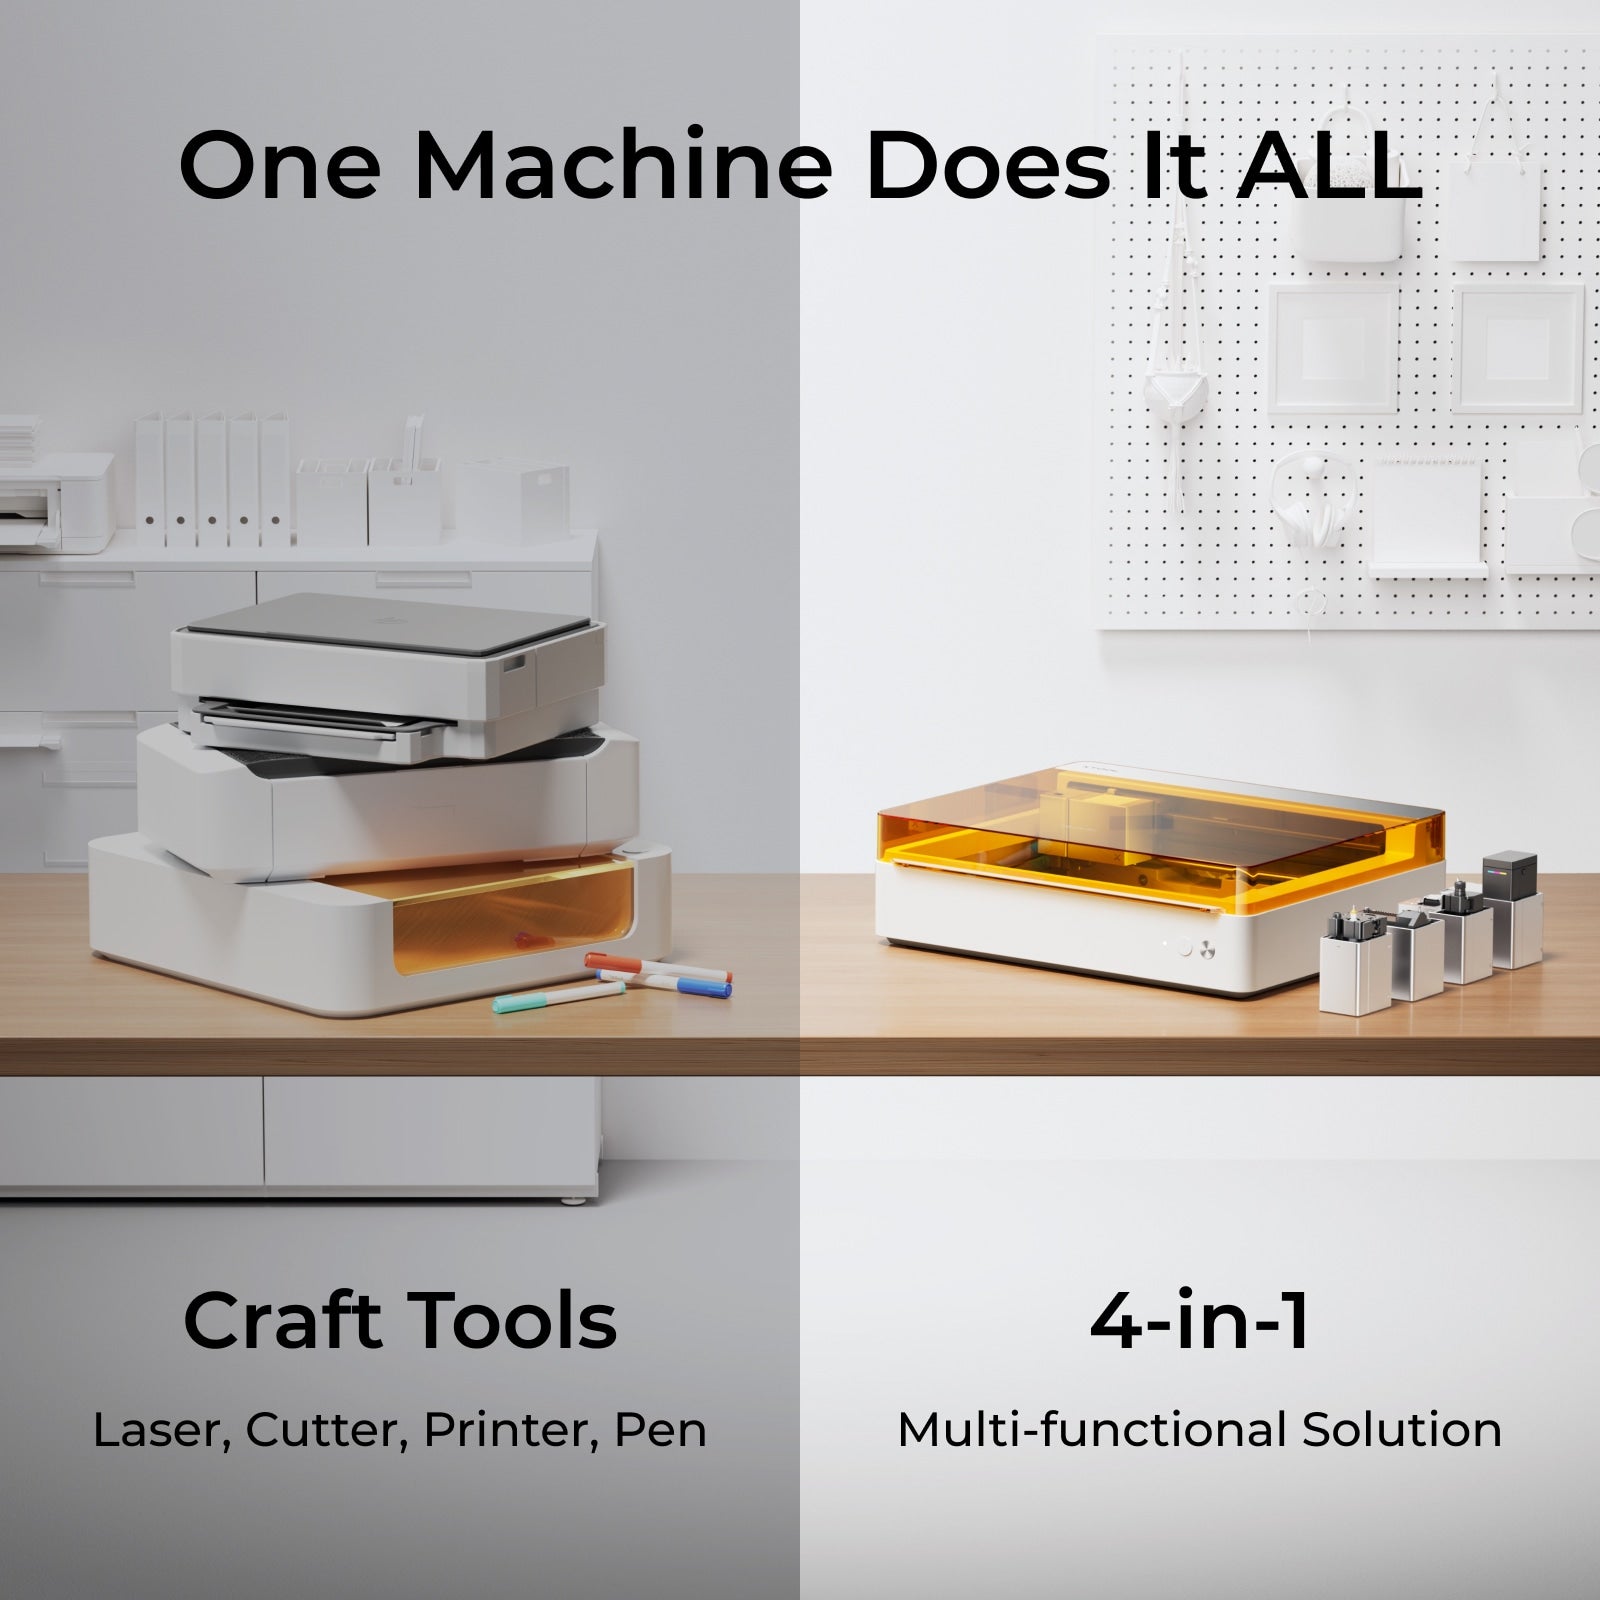 xTool M1 Ultra: The World's First 4-in-1 Craft Machine